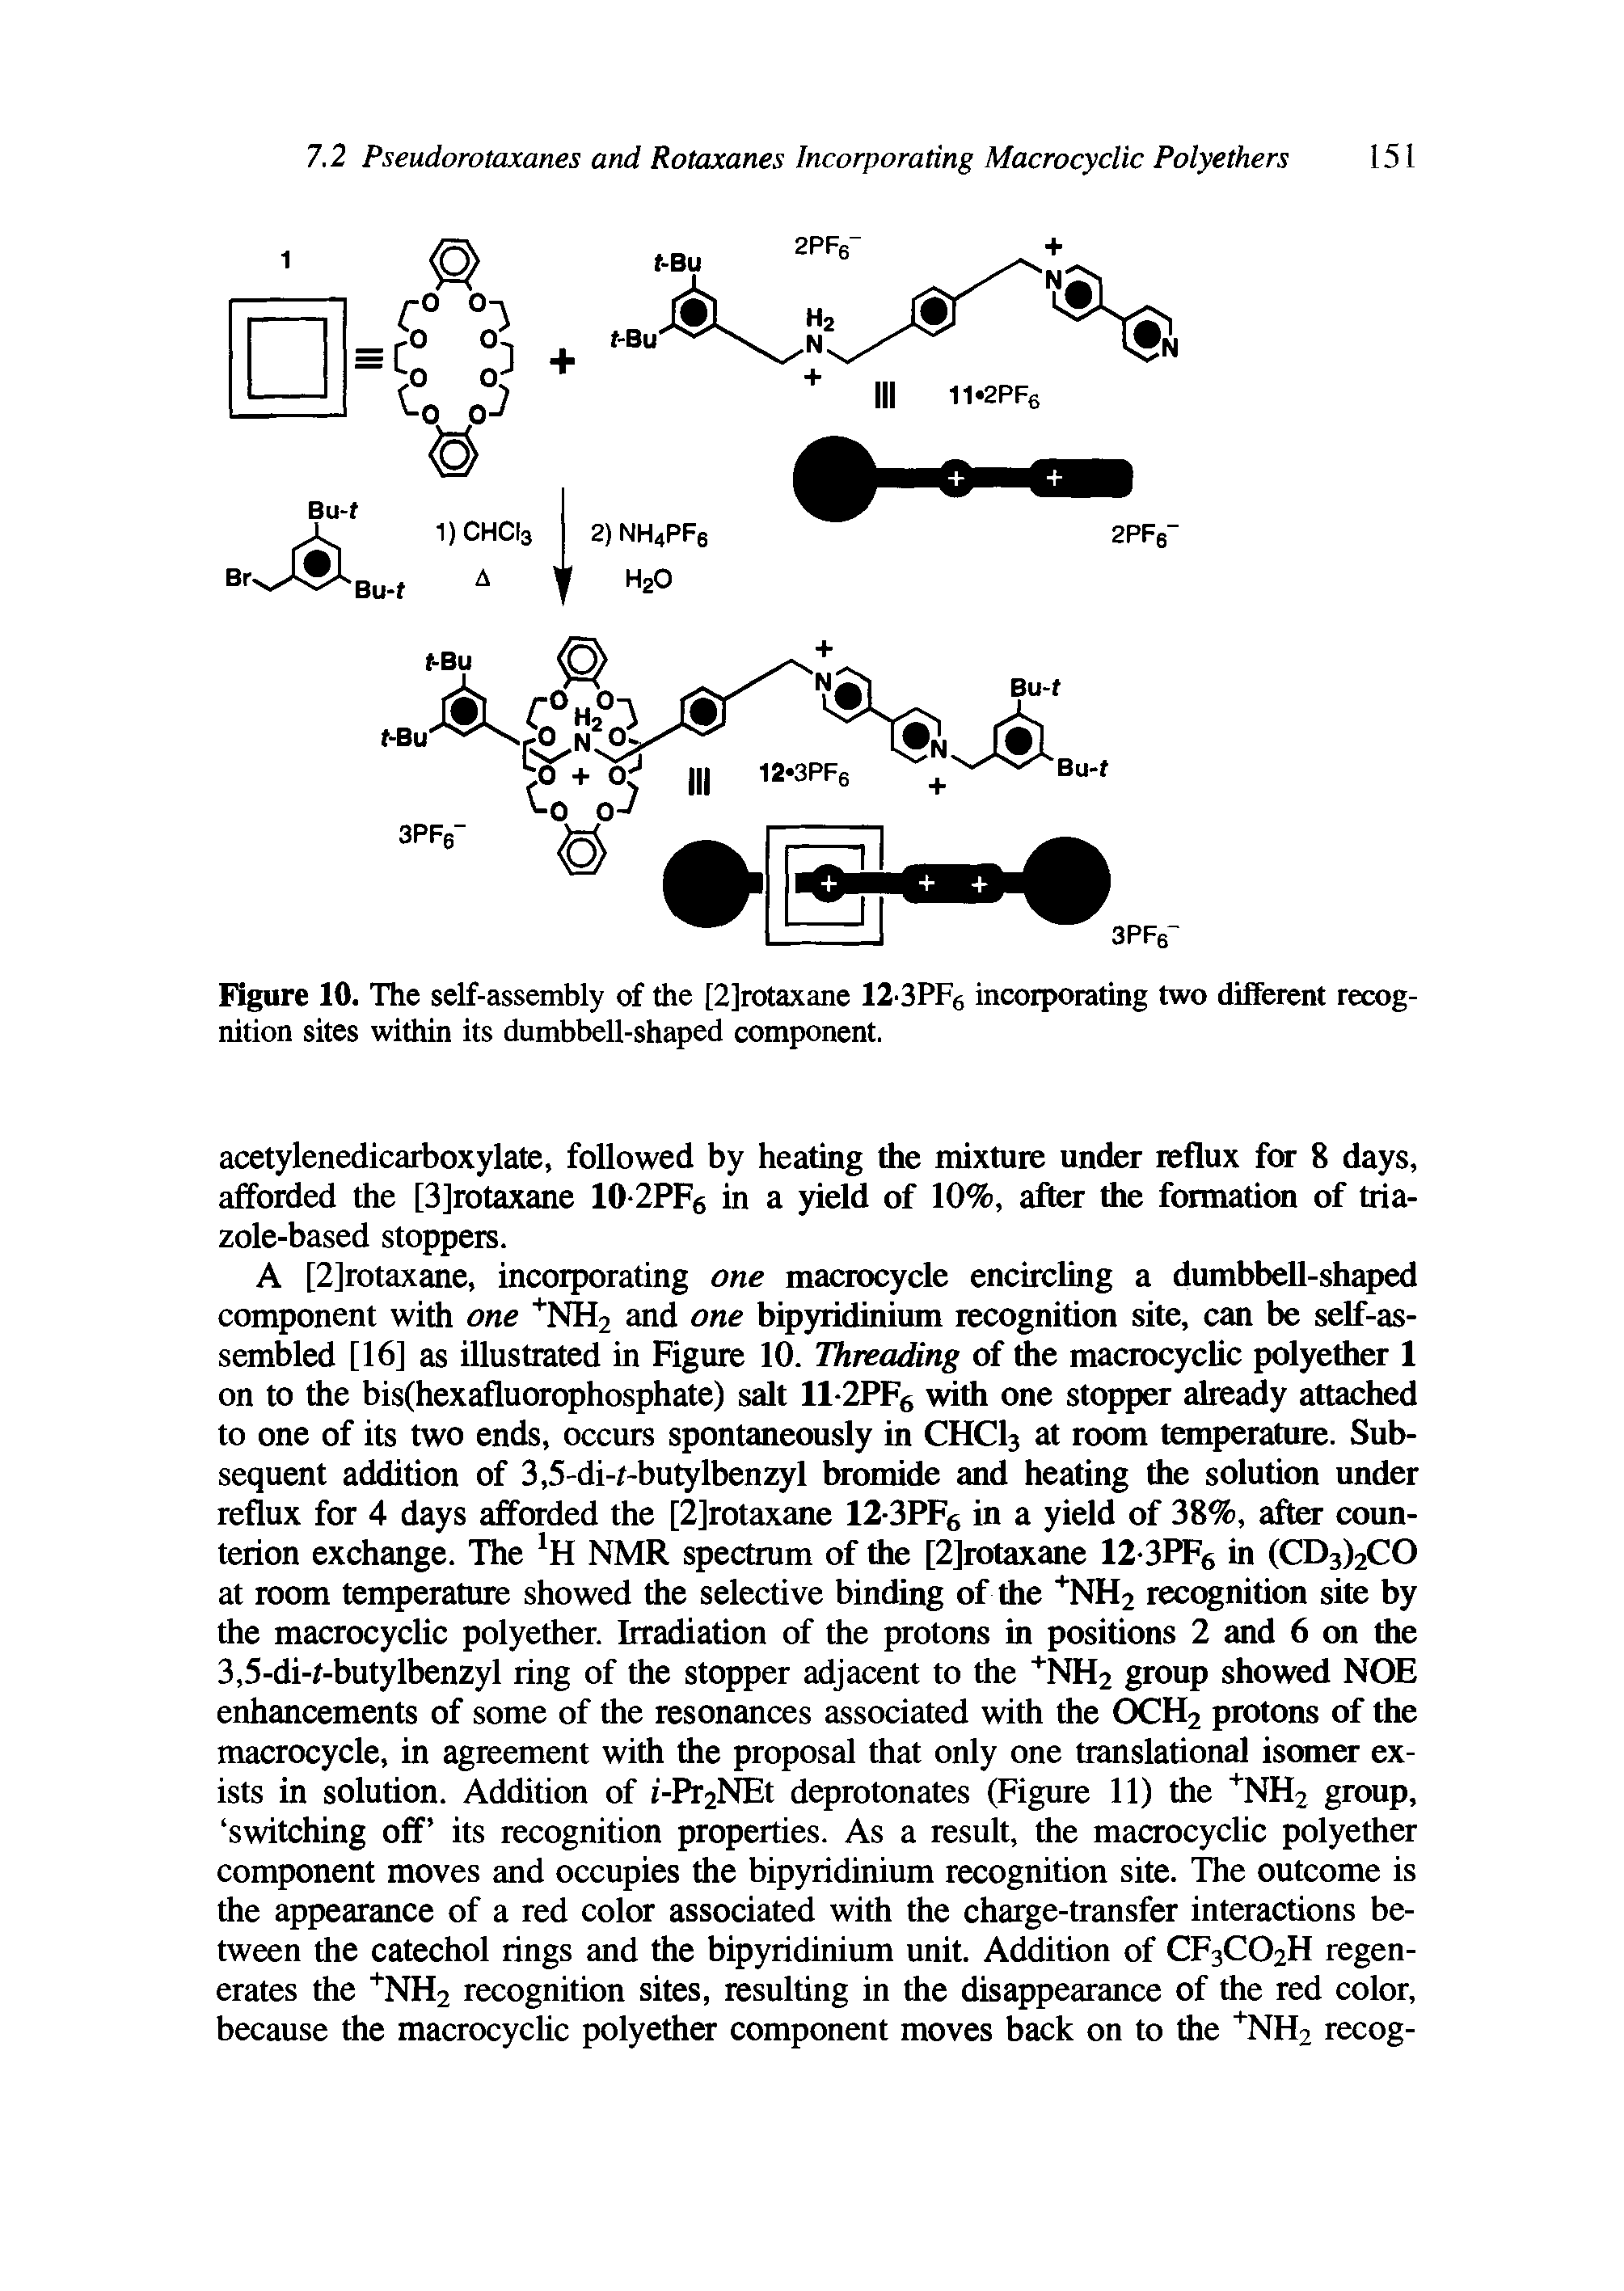 Figure 10. The self-assembly of the [2]rotaxane 12 3PF6 incorporating two different recognition sites within its dumbbell-shaped component.